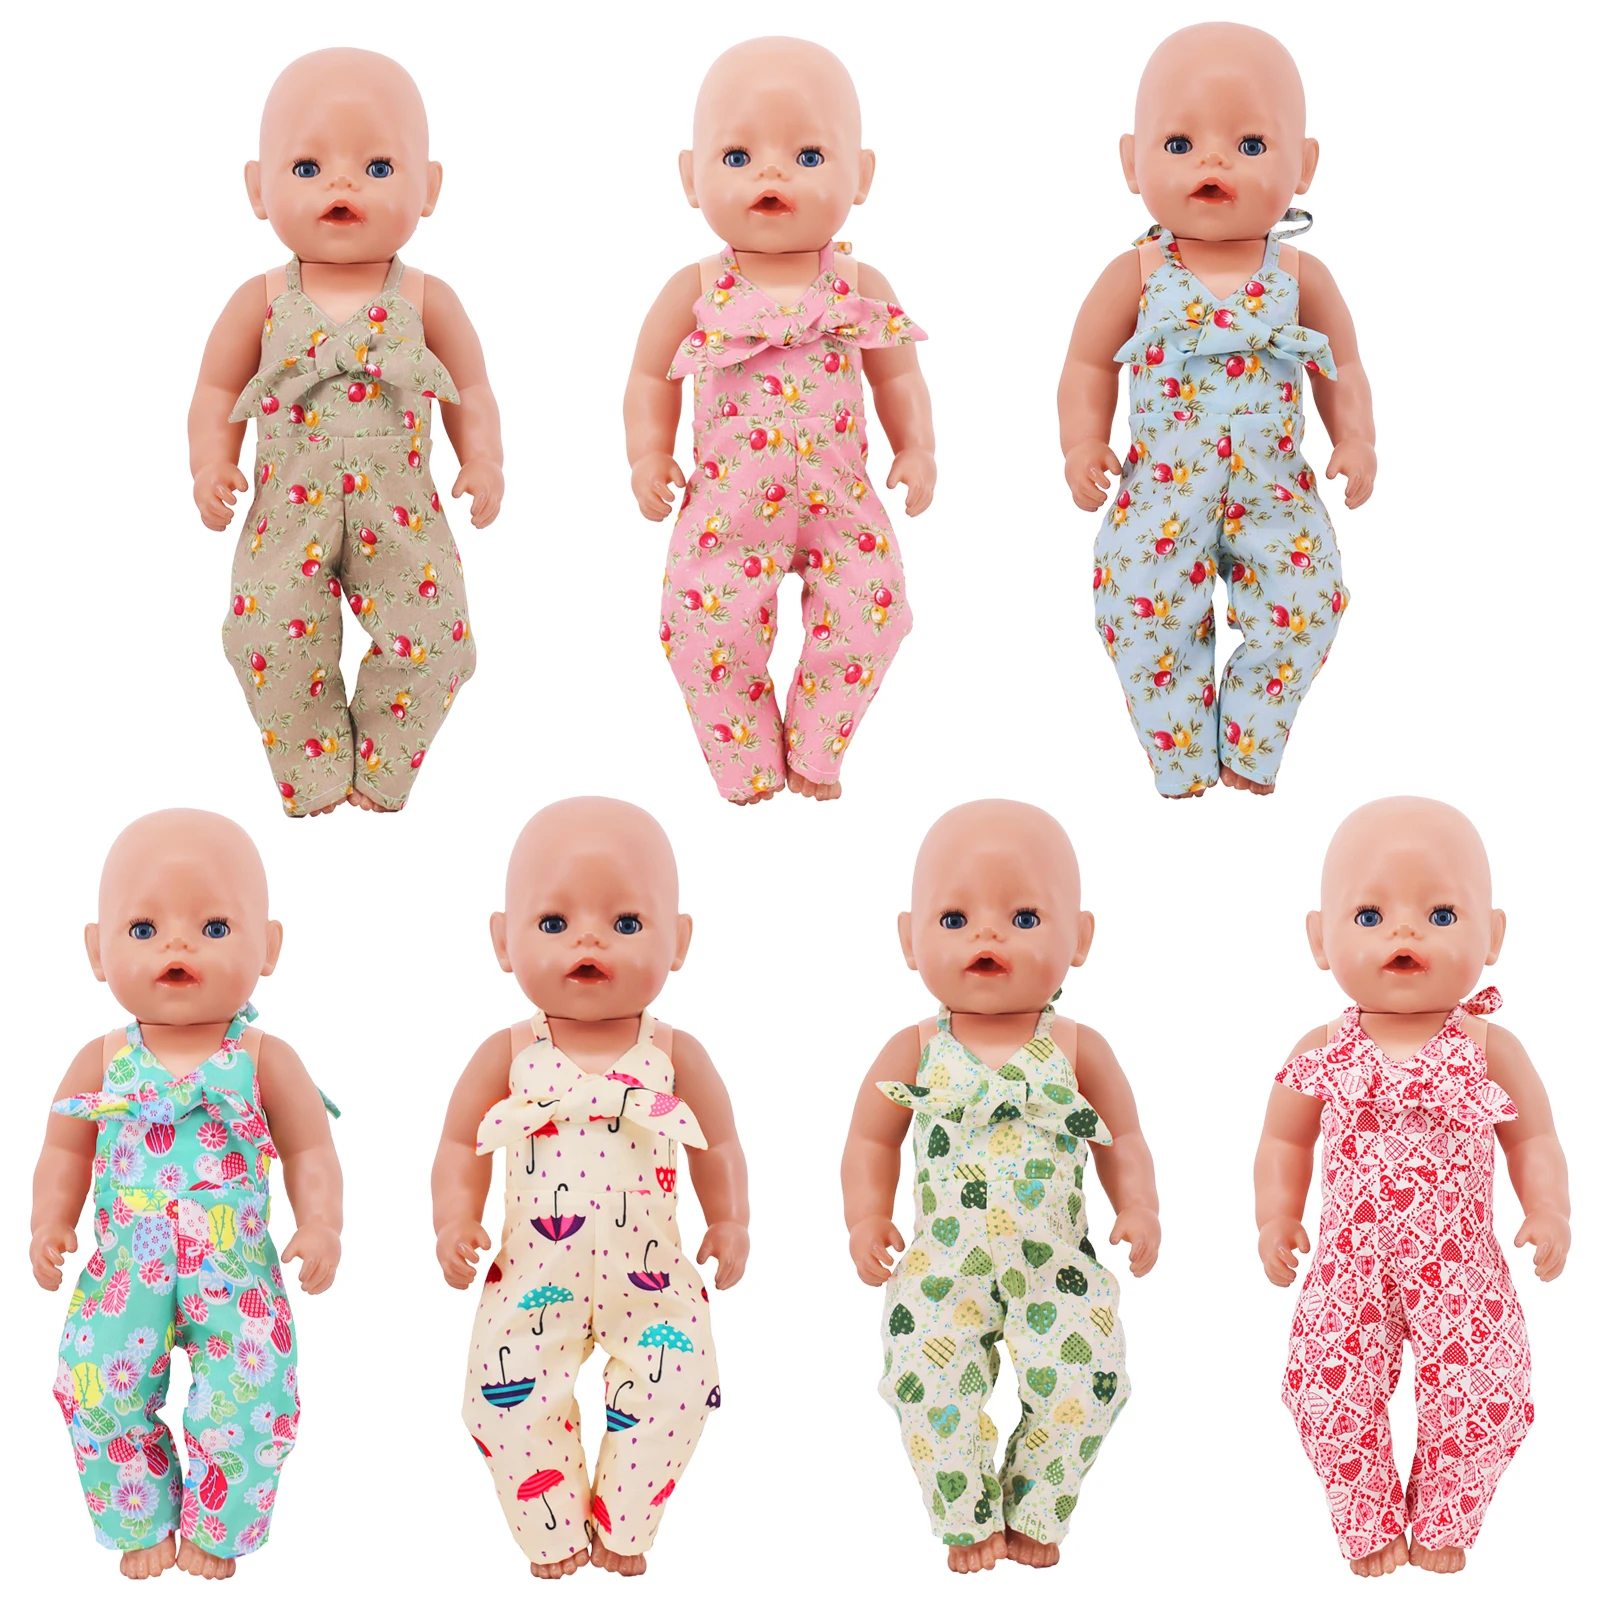 

Doll Clothes Variety Styles Strap Jumpsuits Clothes 43cm Newborn Reborn 18 Inch American Baby For Girl Doll Gift Our Generation